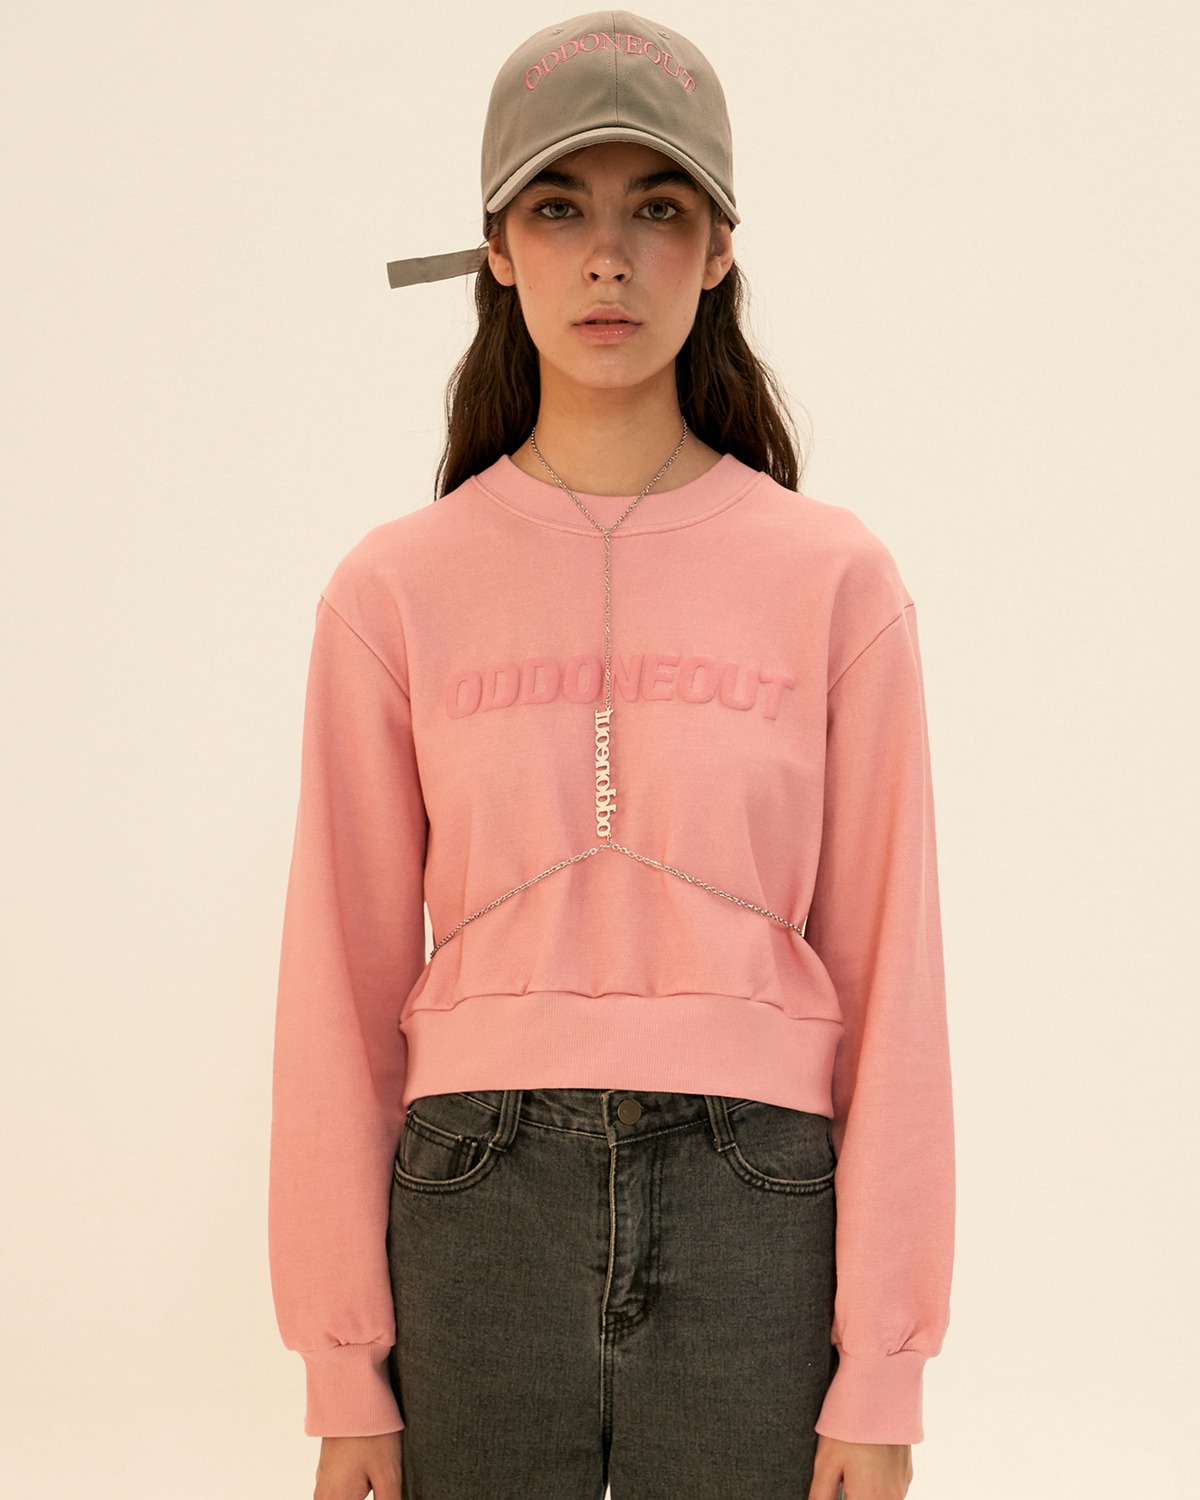 ODD ONE OUT EXMBO CROP CREWNECK_Pink